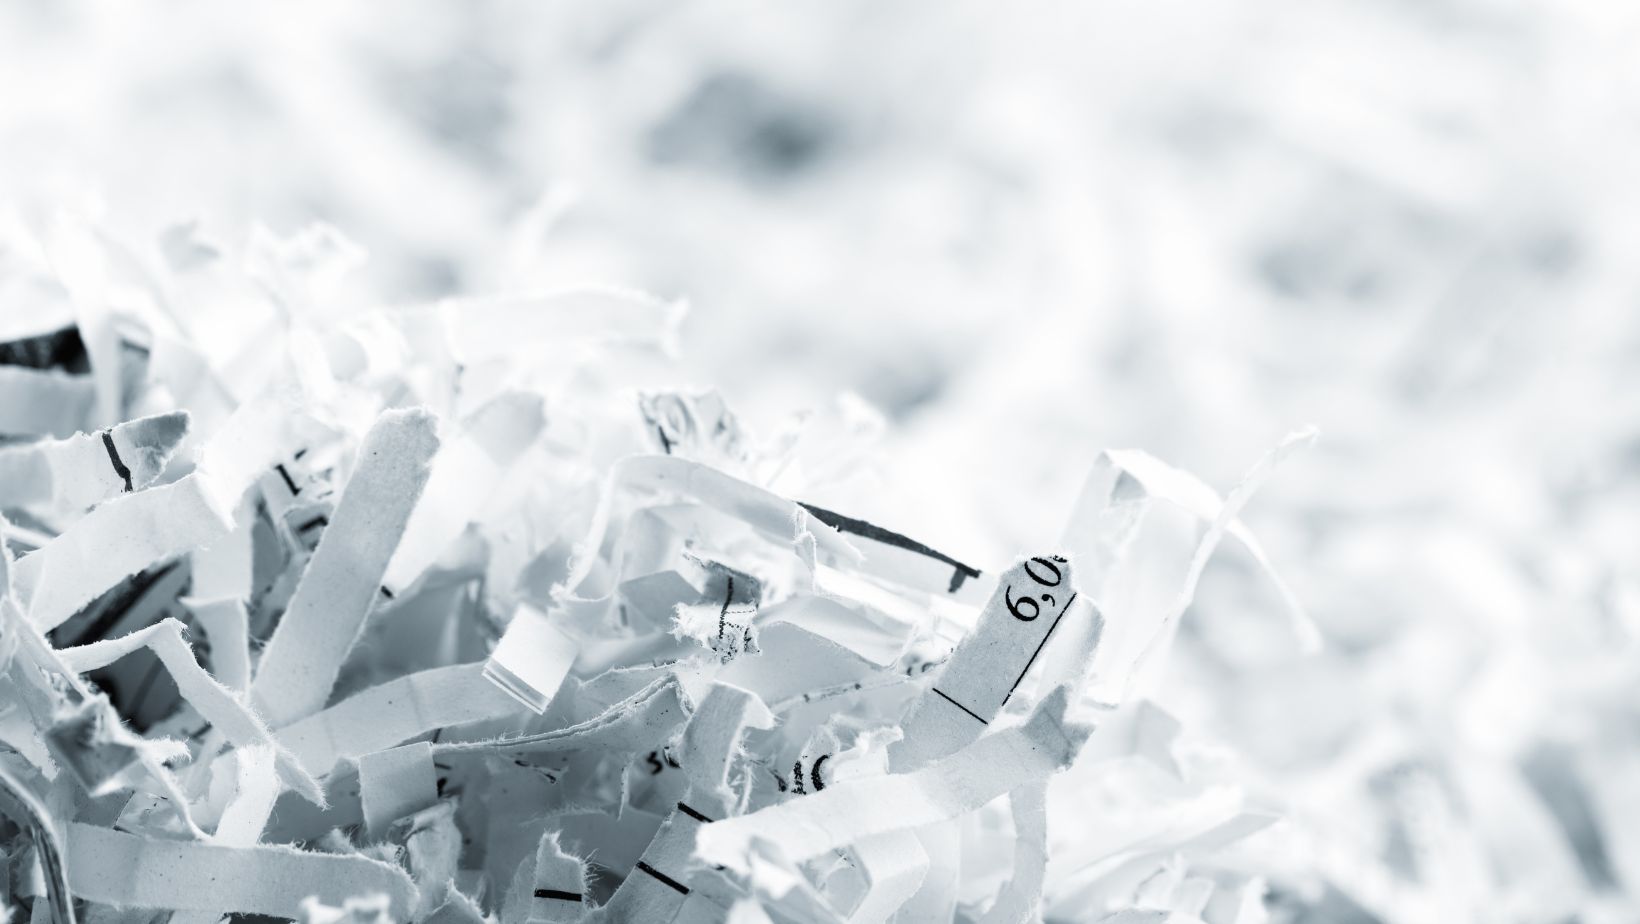 6 Facts About Shredding You Need to Know